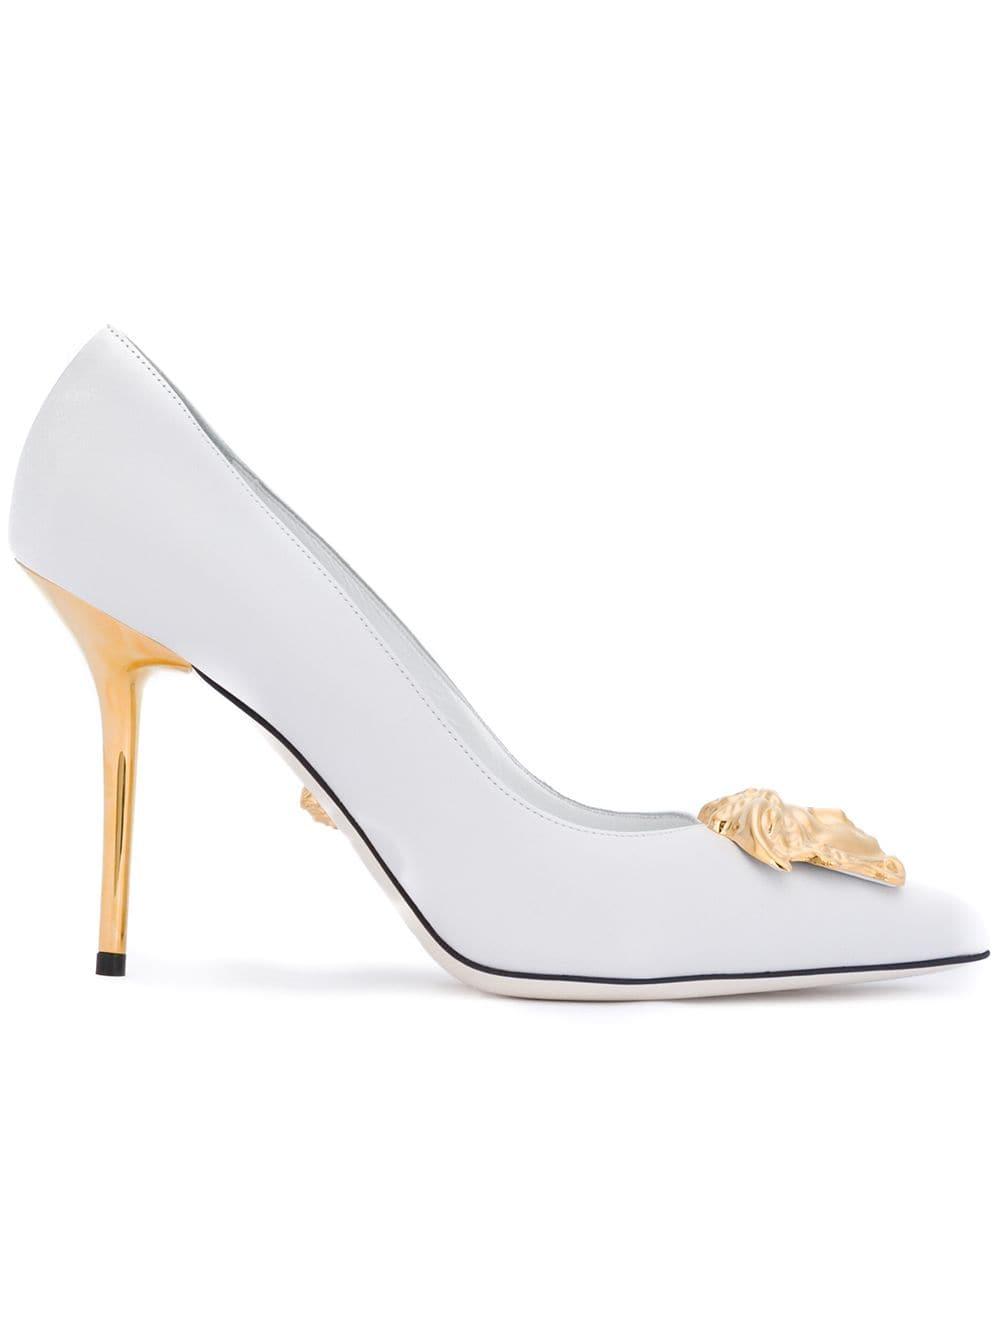 Versace Medusa Palazzo Pumps in White | Lyst